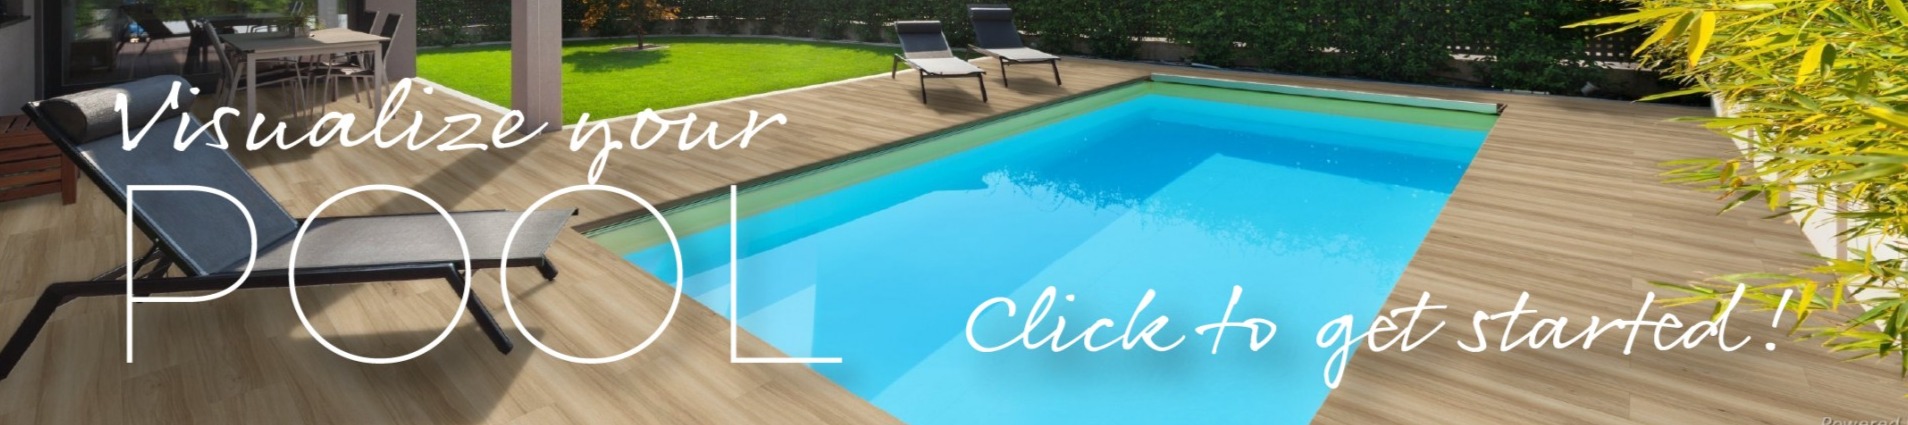 Visualize your Pool - Click to get started